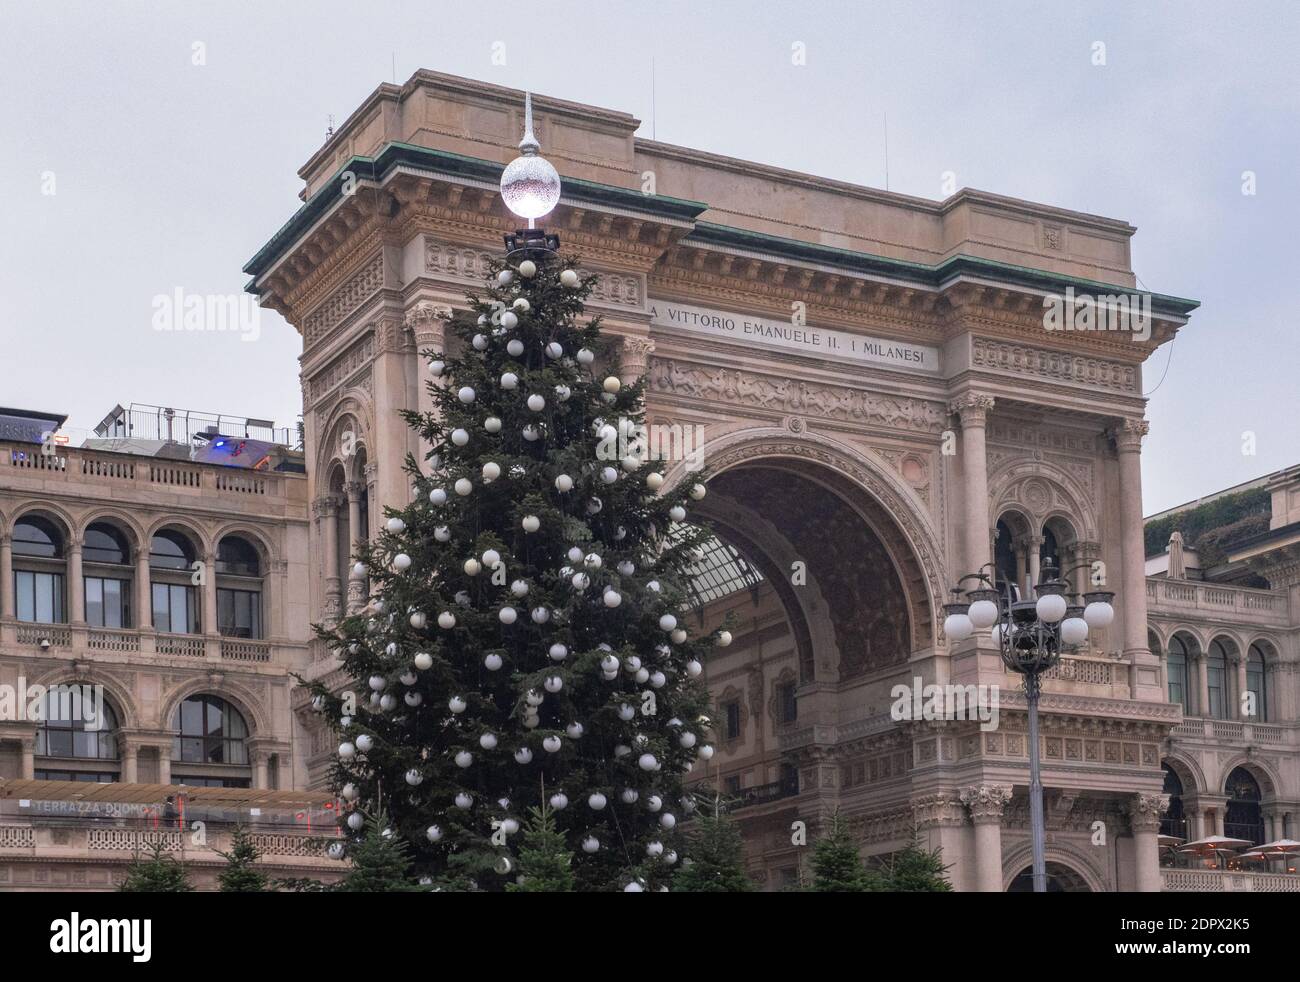 entrance into the Vittorio Emanuele gallery decorated with a large Christmas tree. Duomo Square, Milan, Italy Stock Photo